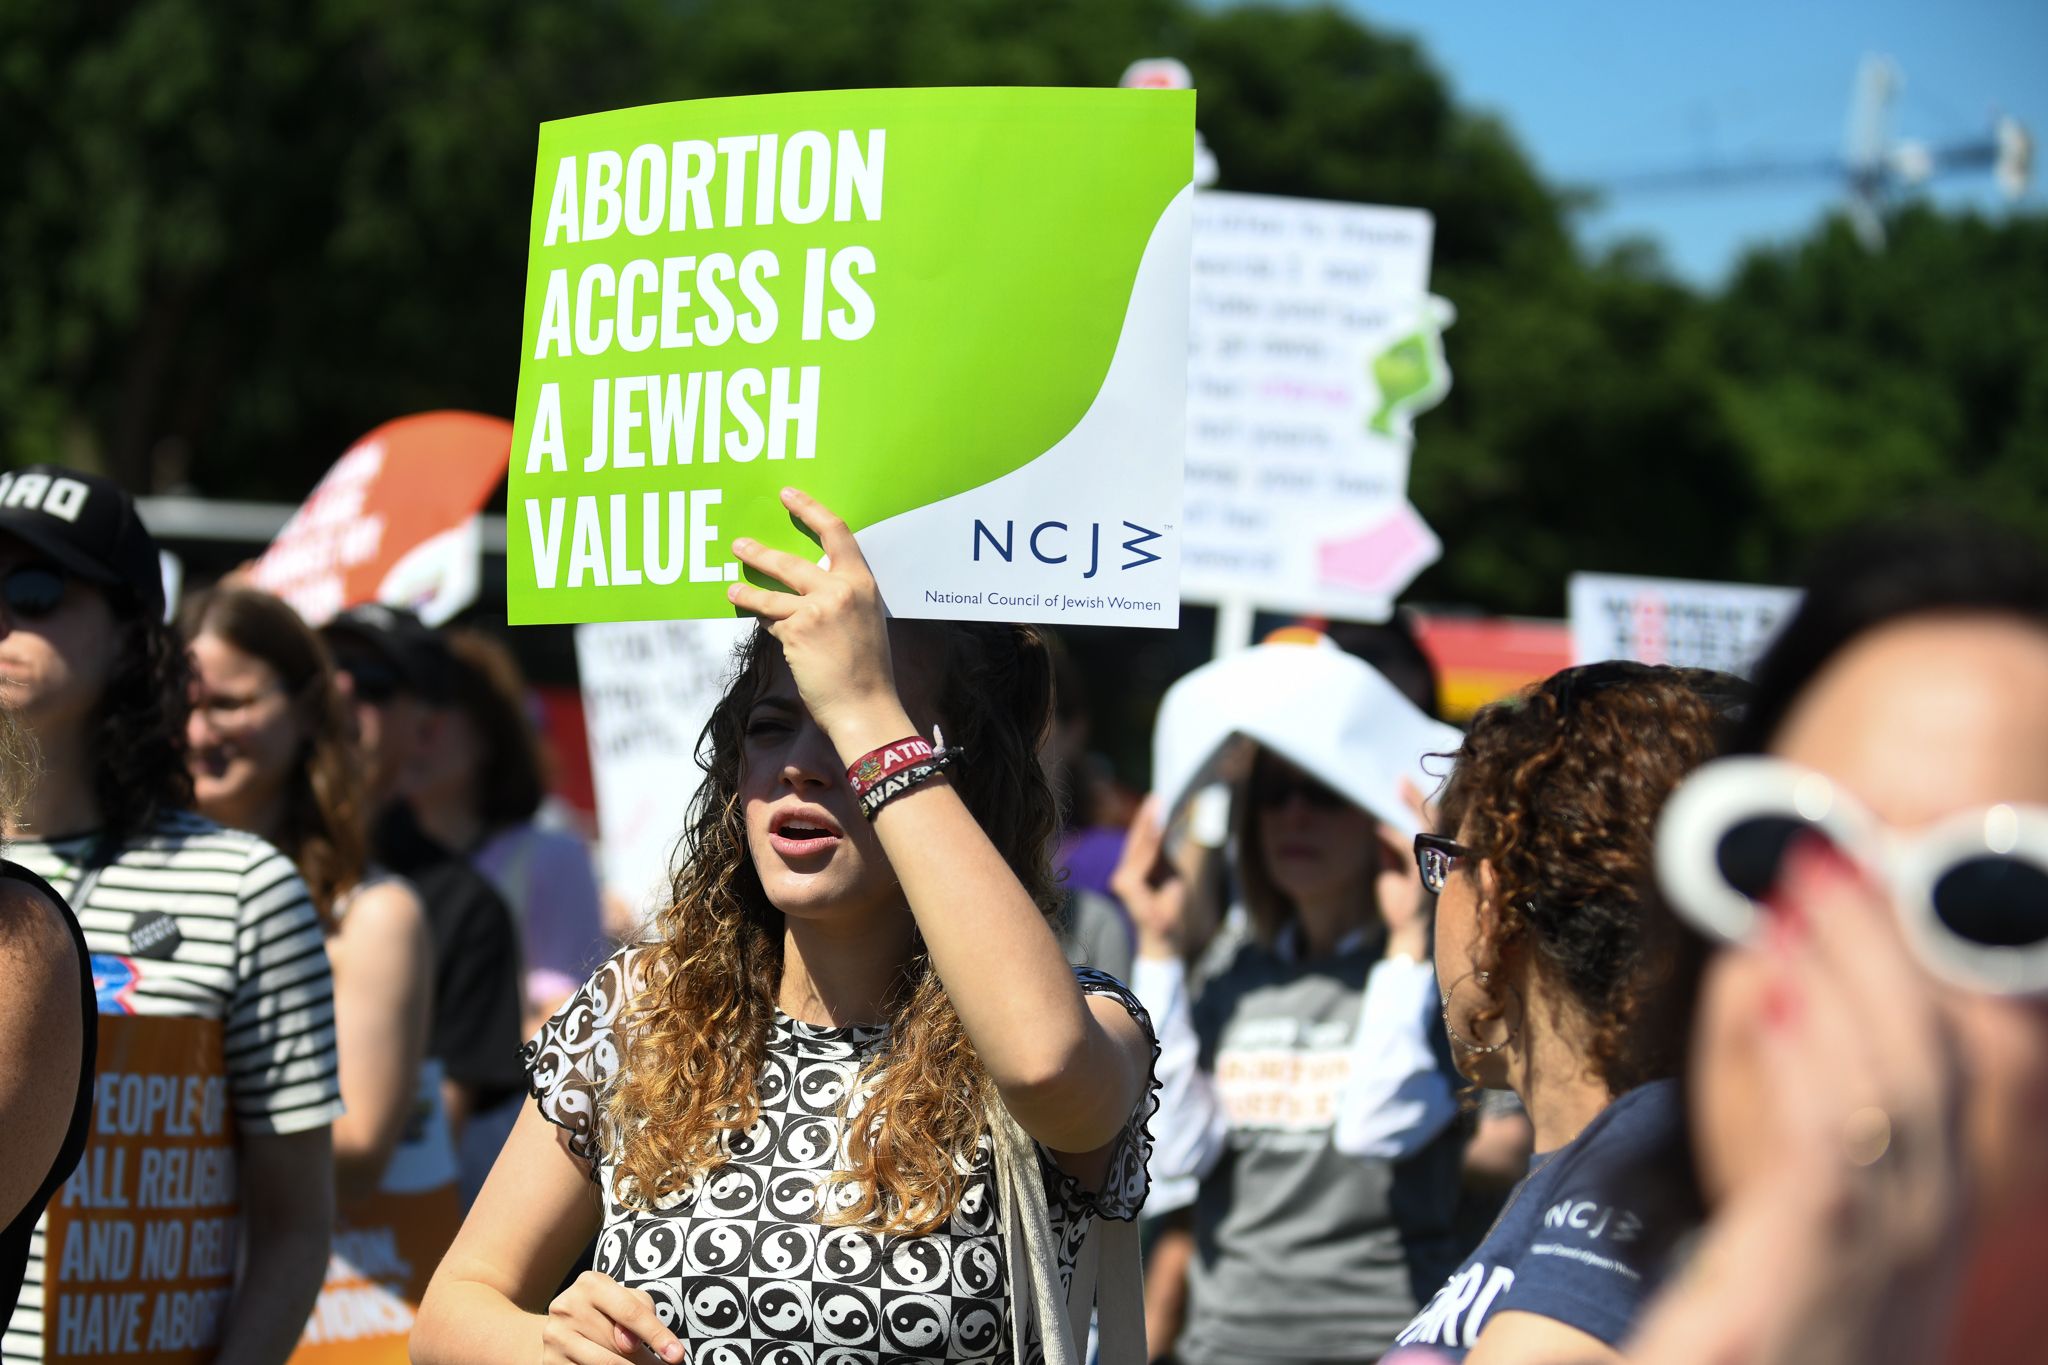 Rallygoers hold up a sign saying "abortion access is a Jewish value."